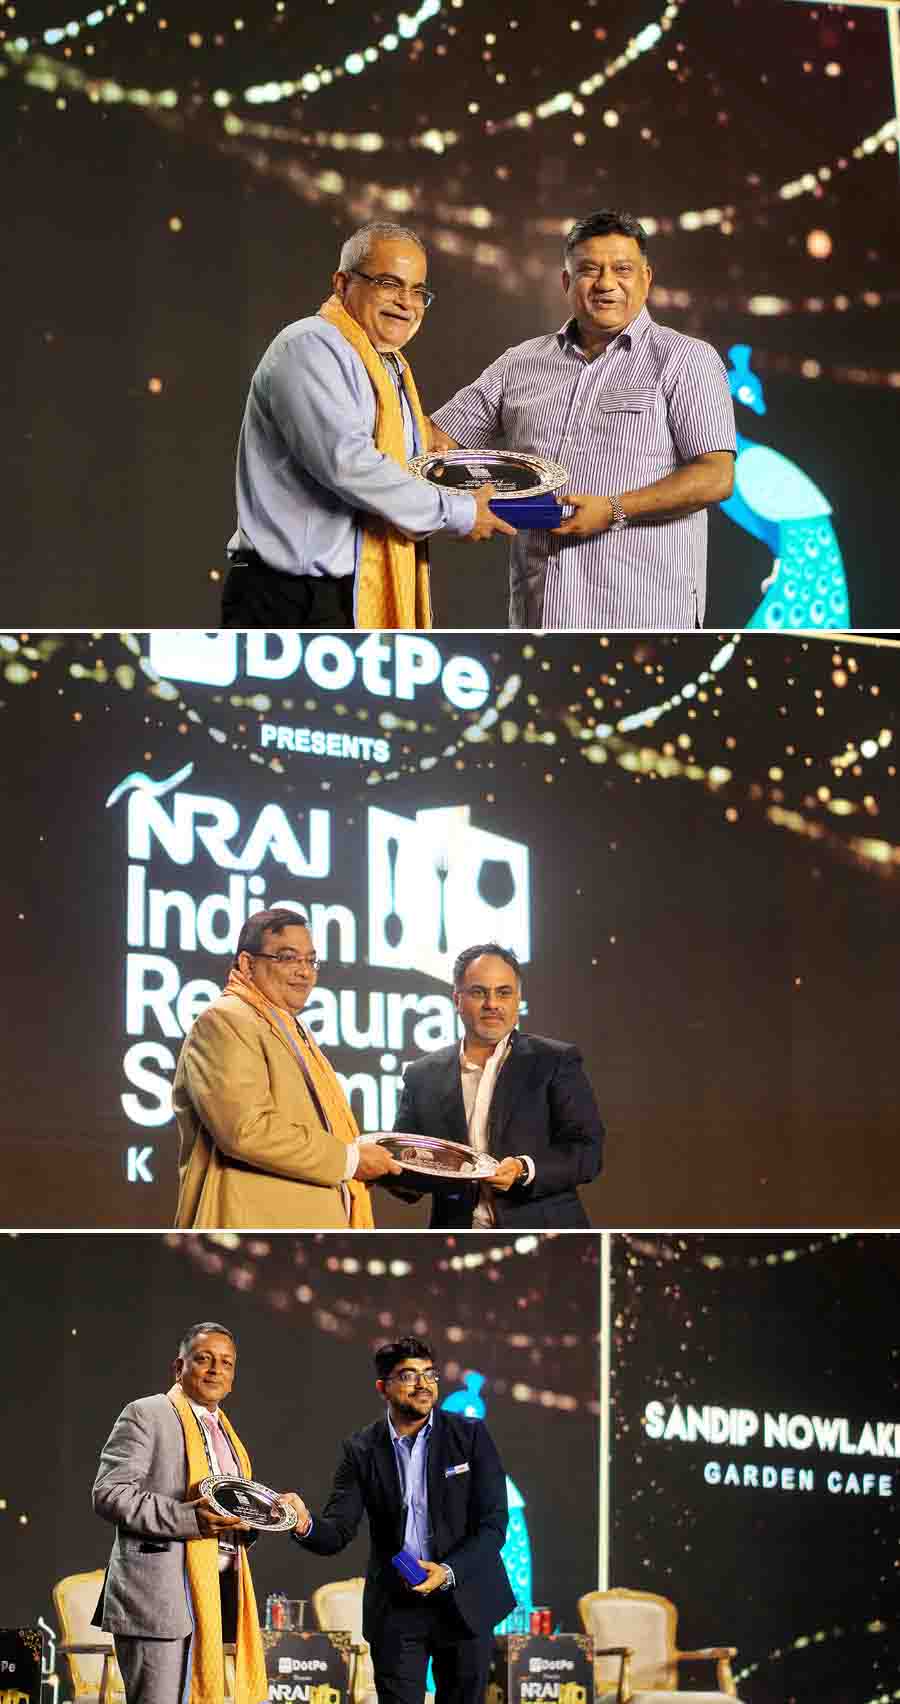 (Top) Pratap Daryanani, owner, Oasis received the award from Sandeep Anand Goyle, director, Essex Farms; (centre) Aninda Palit, co-owner, 6 Ballygunge Place was awarded by Kabir Suri, co-founder & director, Azure Hospitality, and president of NRAI; (bottom) Sandeep Nawlakha, owner, Garden Cafe received the award from Sagar Daryani, NRAI vice-president and co-founder Wow! Momo. Tony Pradhan, owner of Kathleen's, was not present 